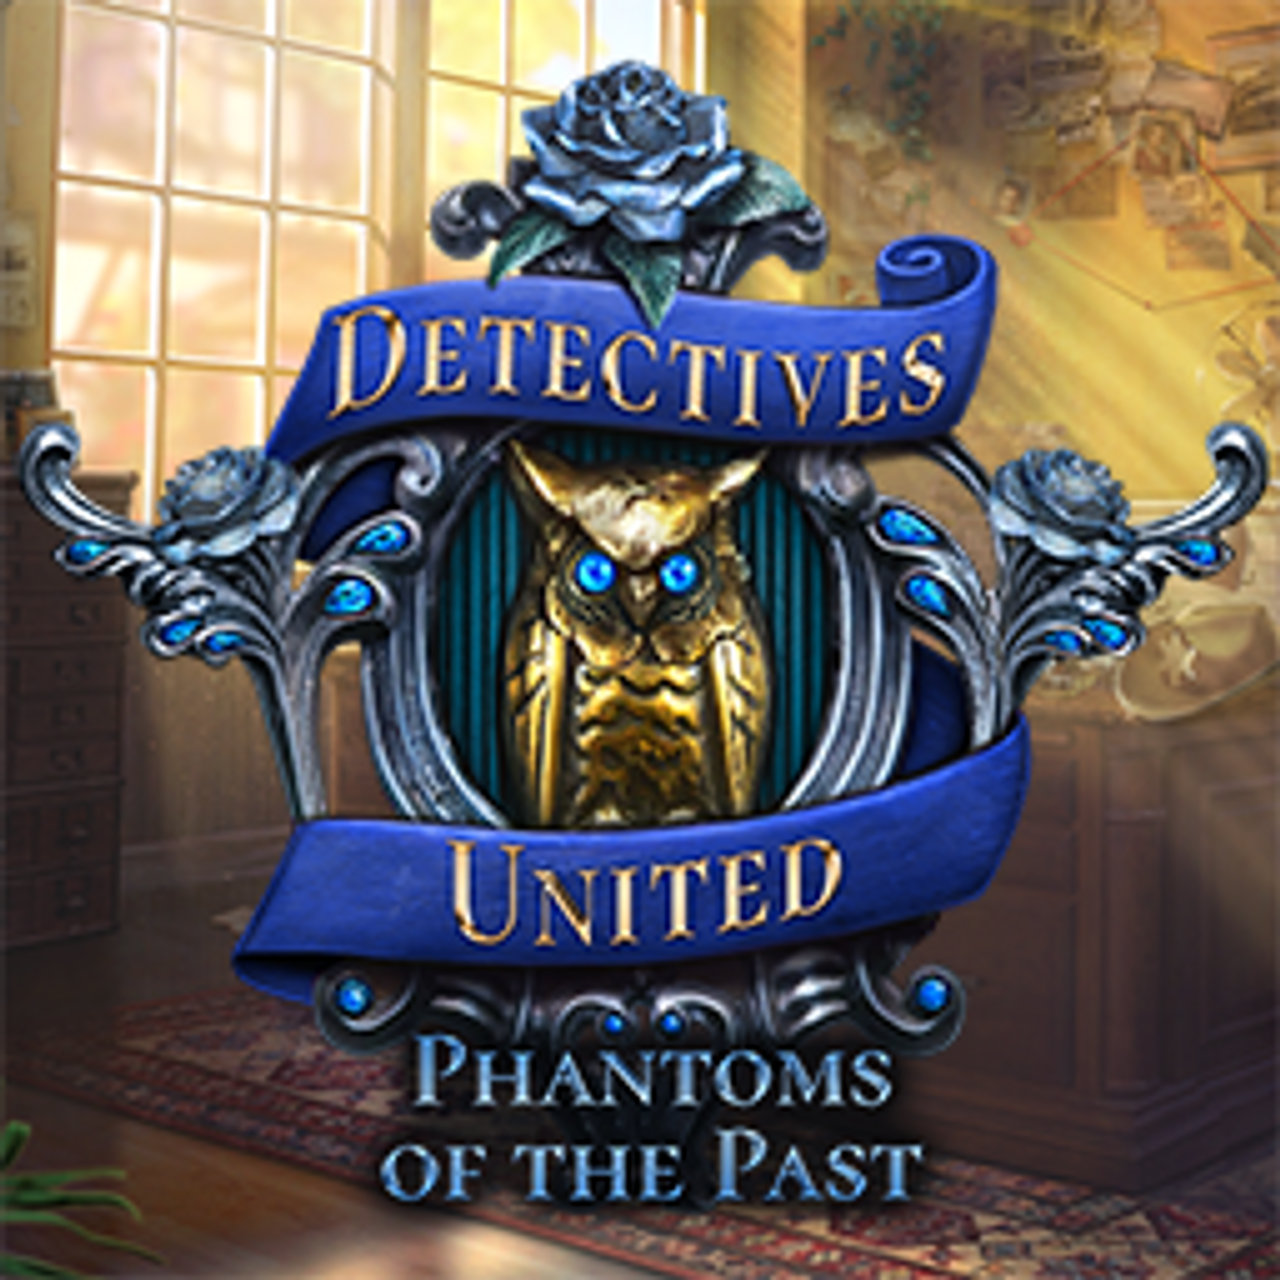 Detective's United: Phantoms of the Past